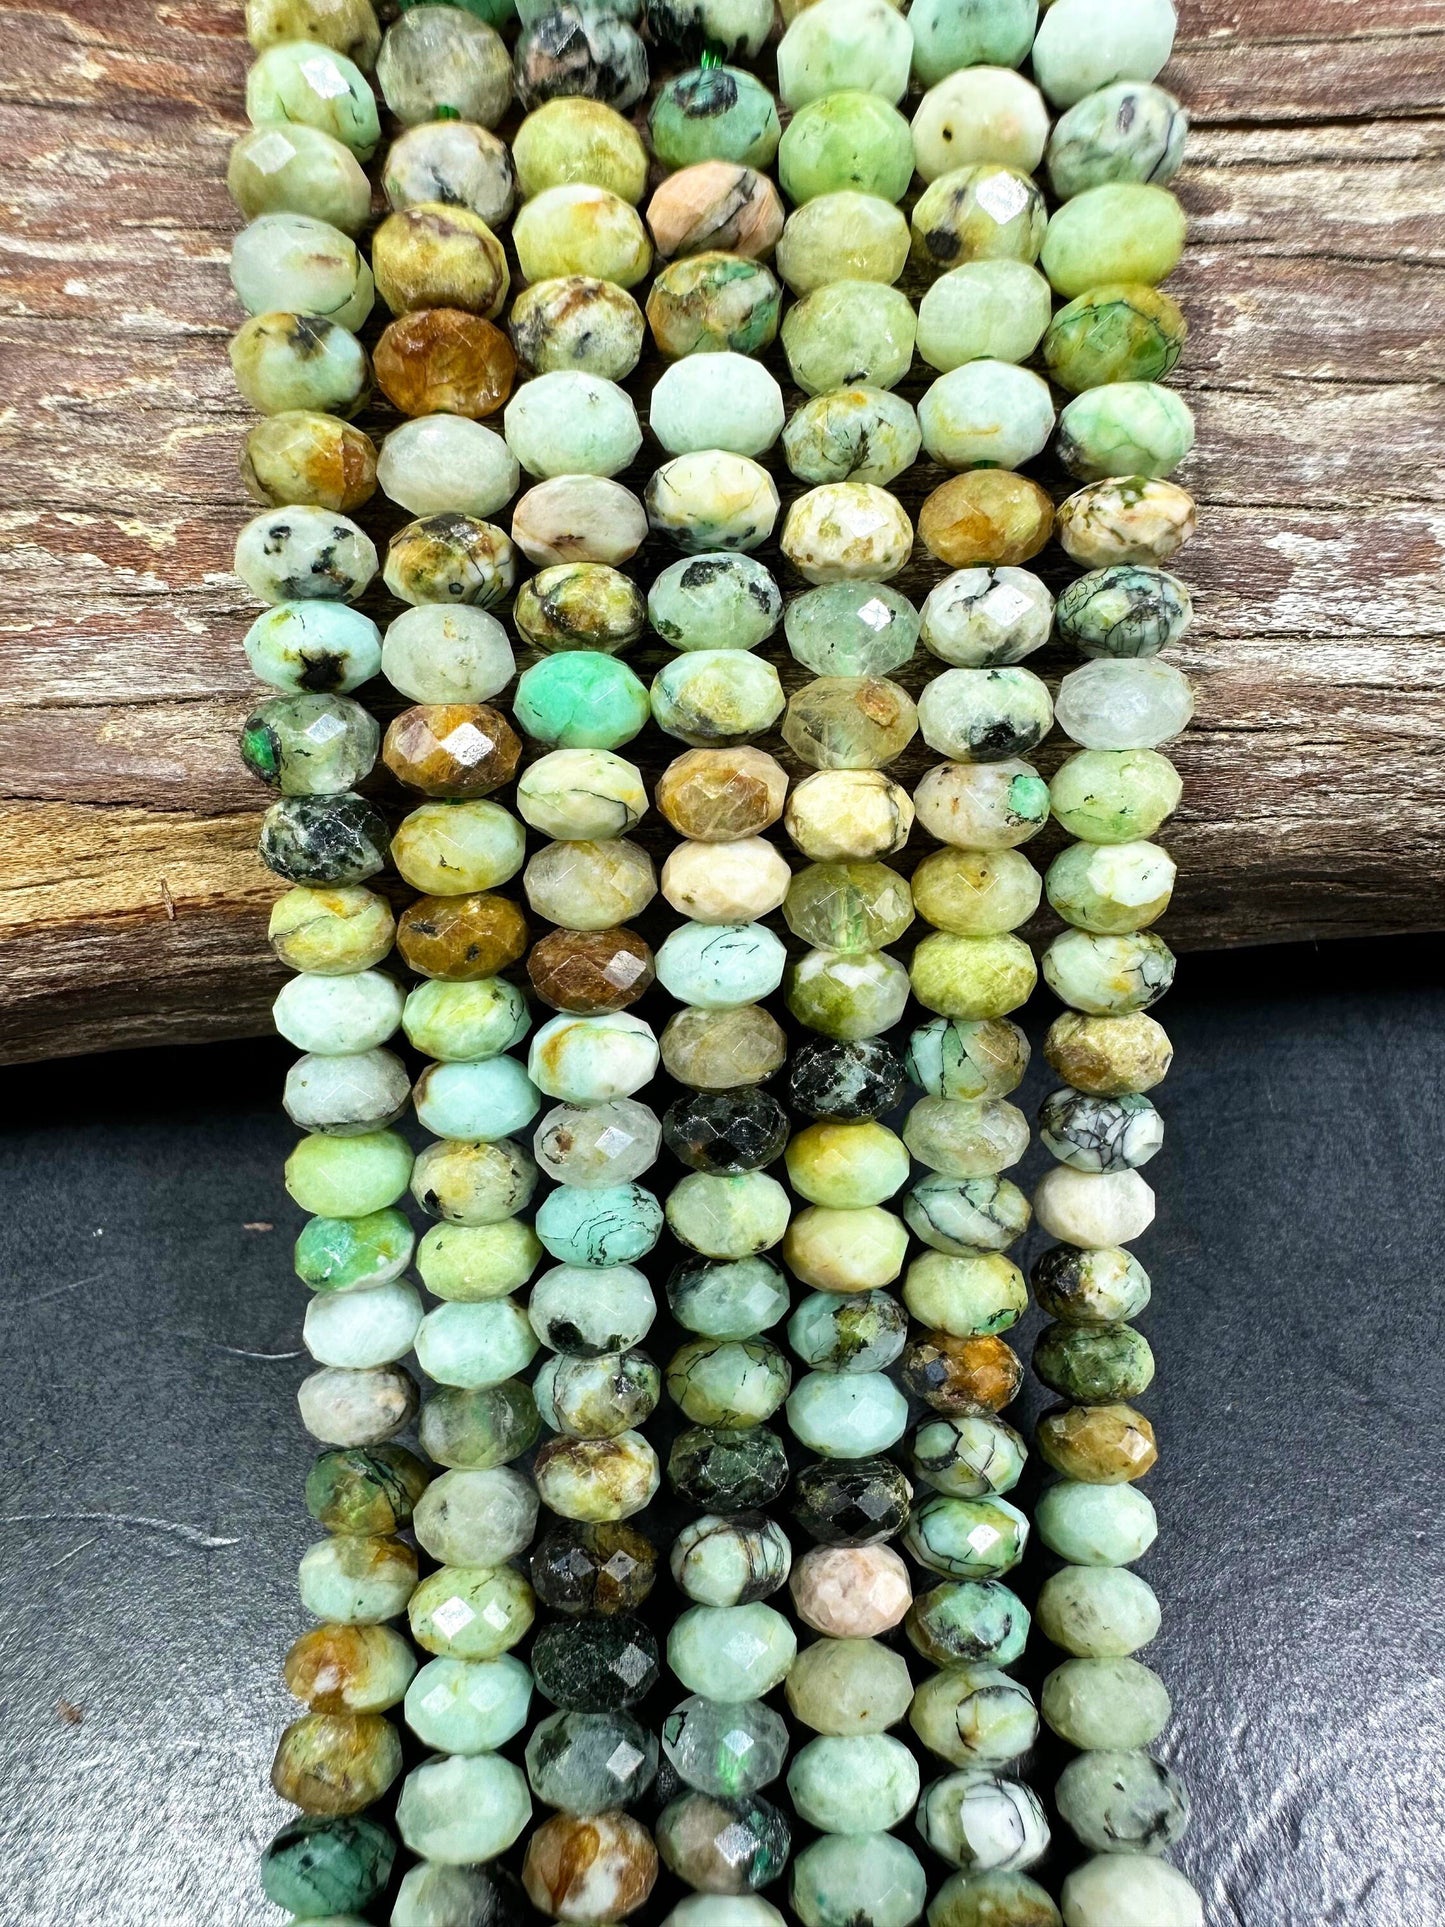 NATURAL Chrysocolla Gemstone Faceted Rondelle Shape 6x4mm Bead. Gorgeous Green Brown Color. Great Quality Full Strand 15.5"